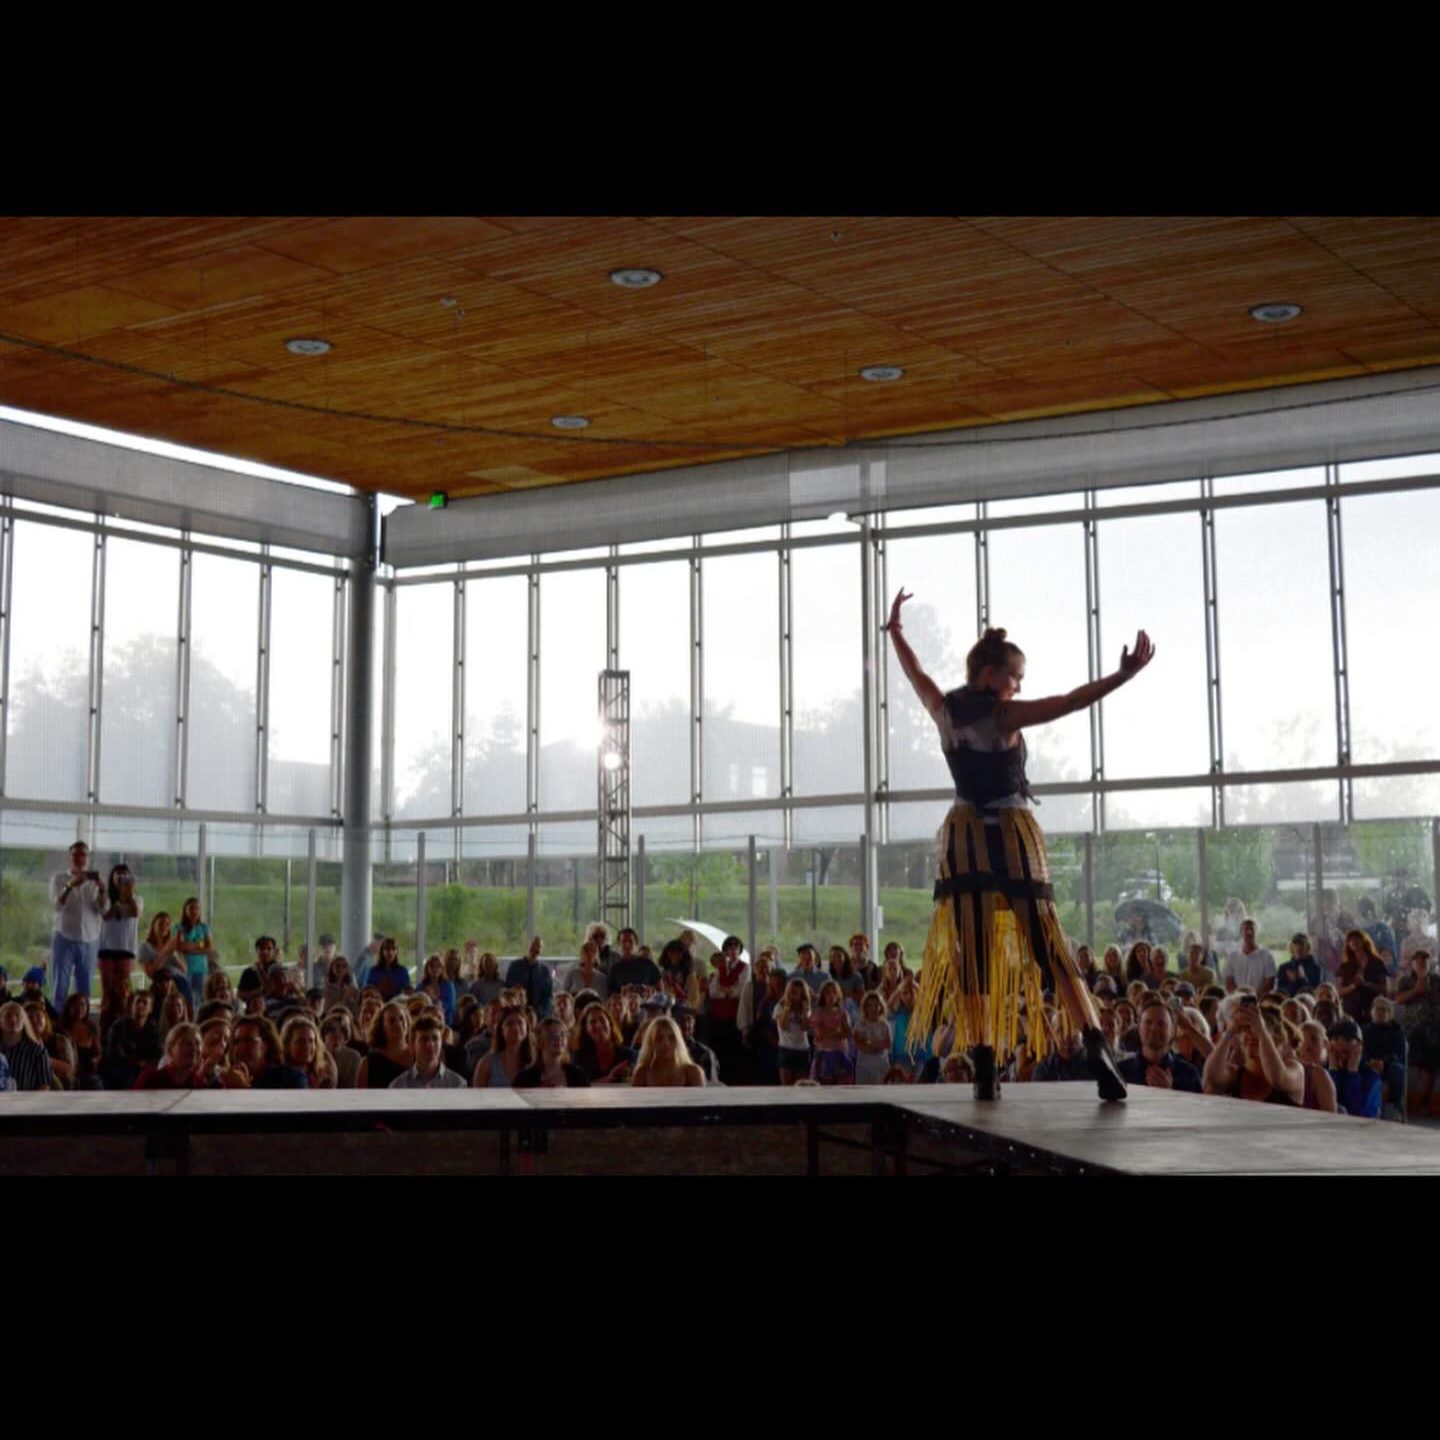 A model on stage in the foreground with a crowd of people in the background of a window-paneled arena